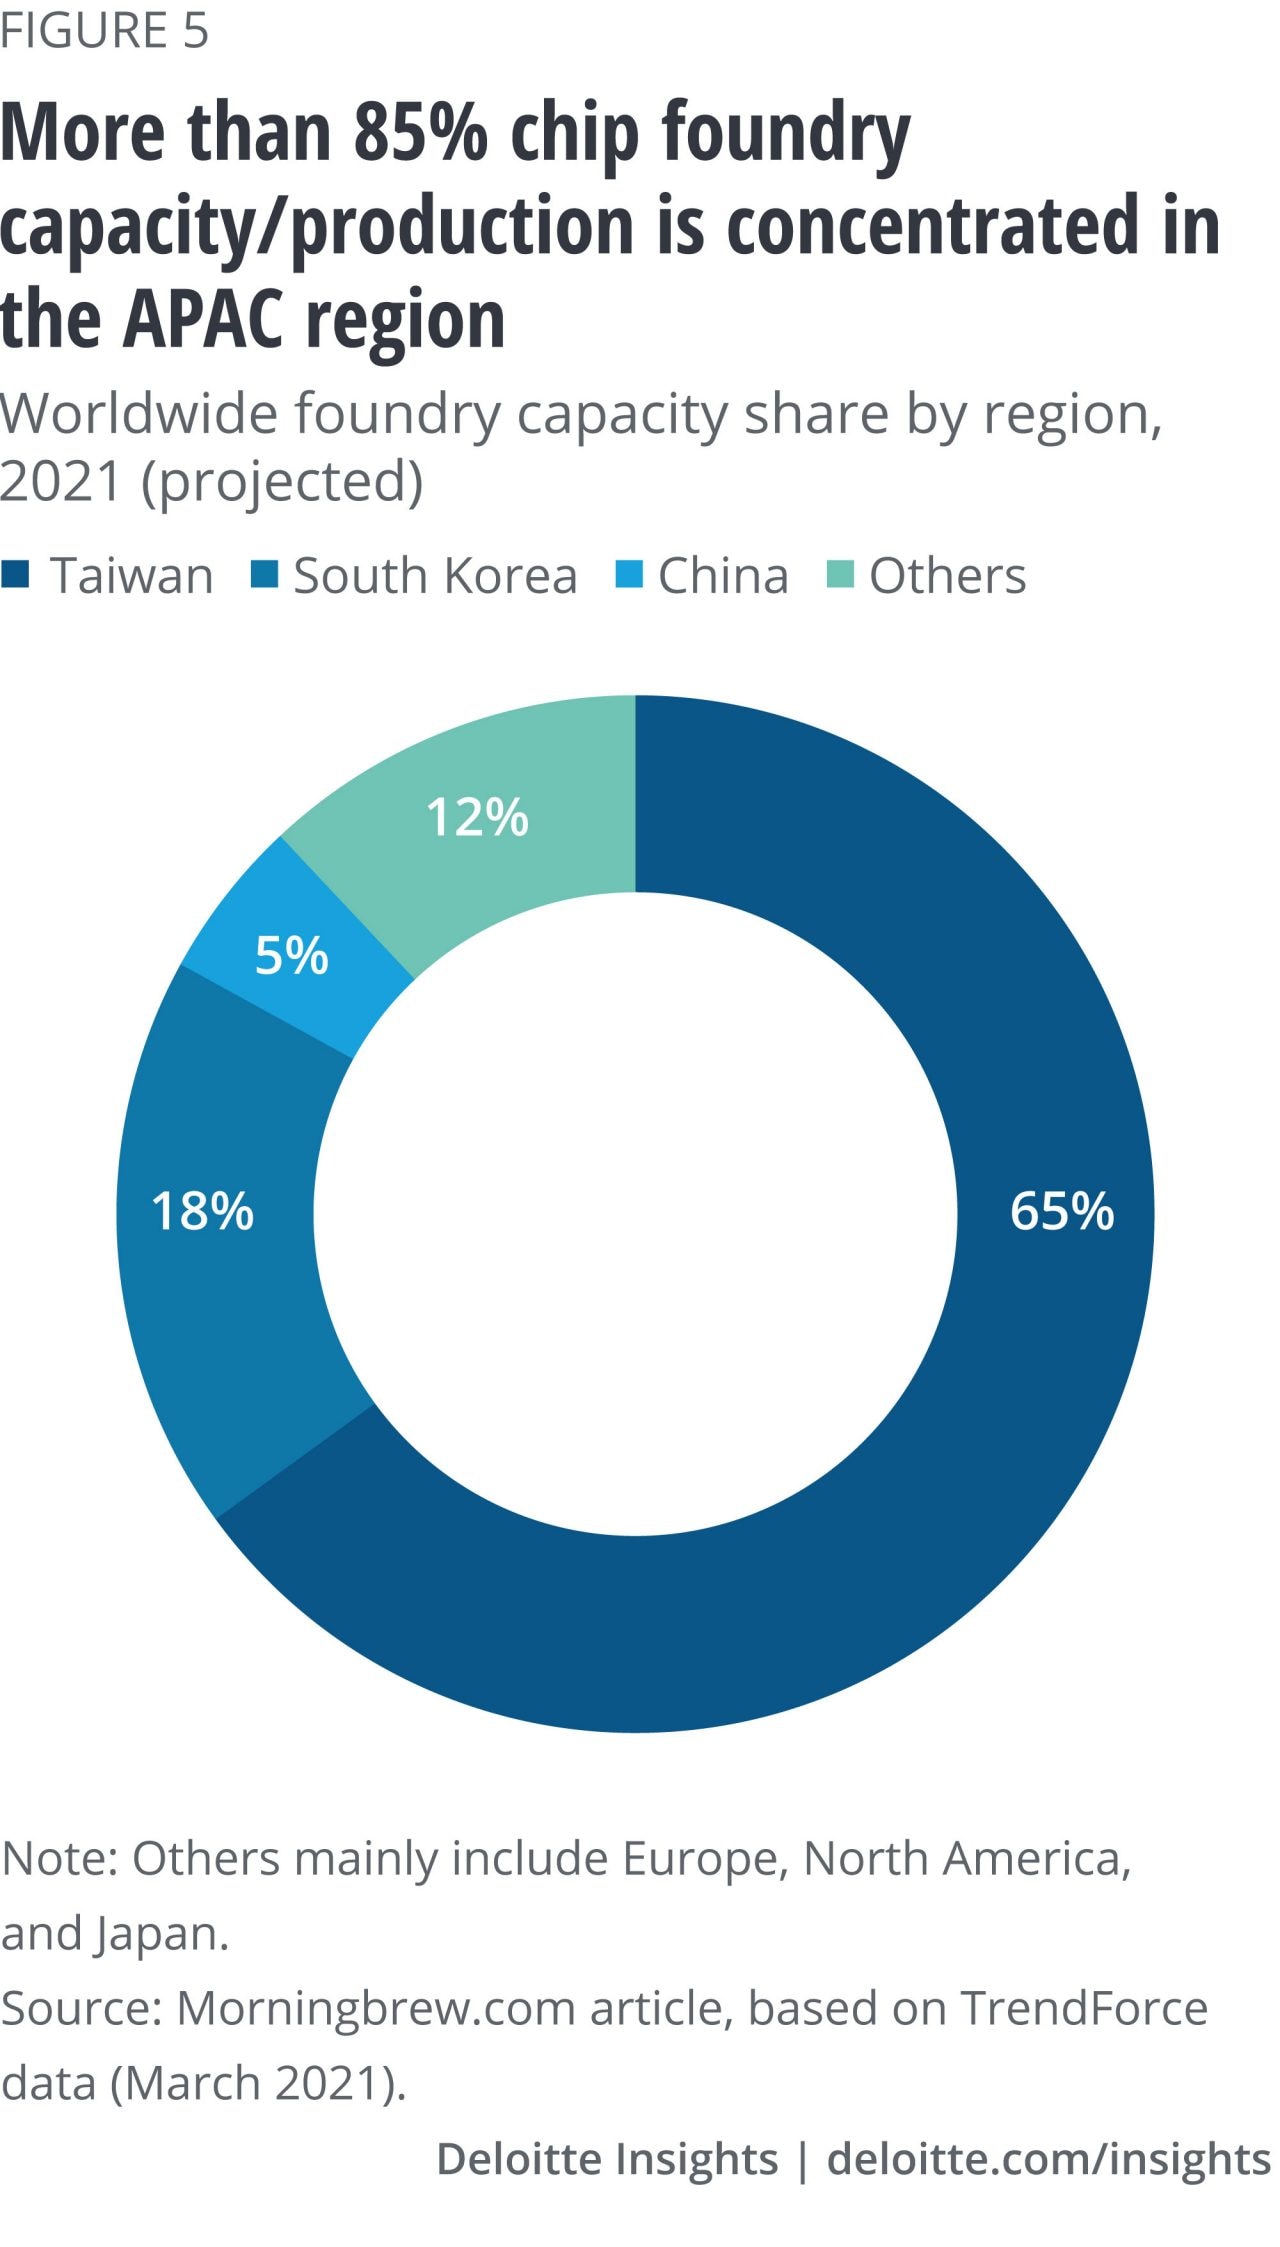 Figure 5. More than 85% of chip foundry capacity and production is concentrated in the APAC region